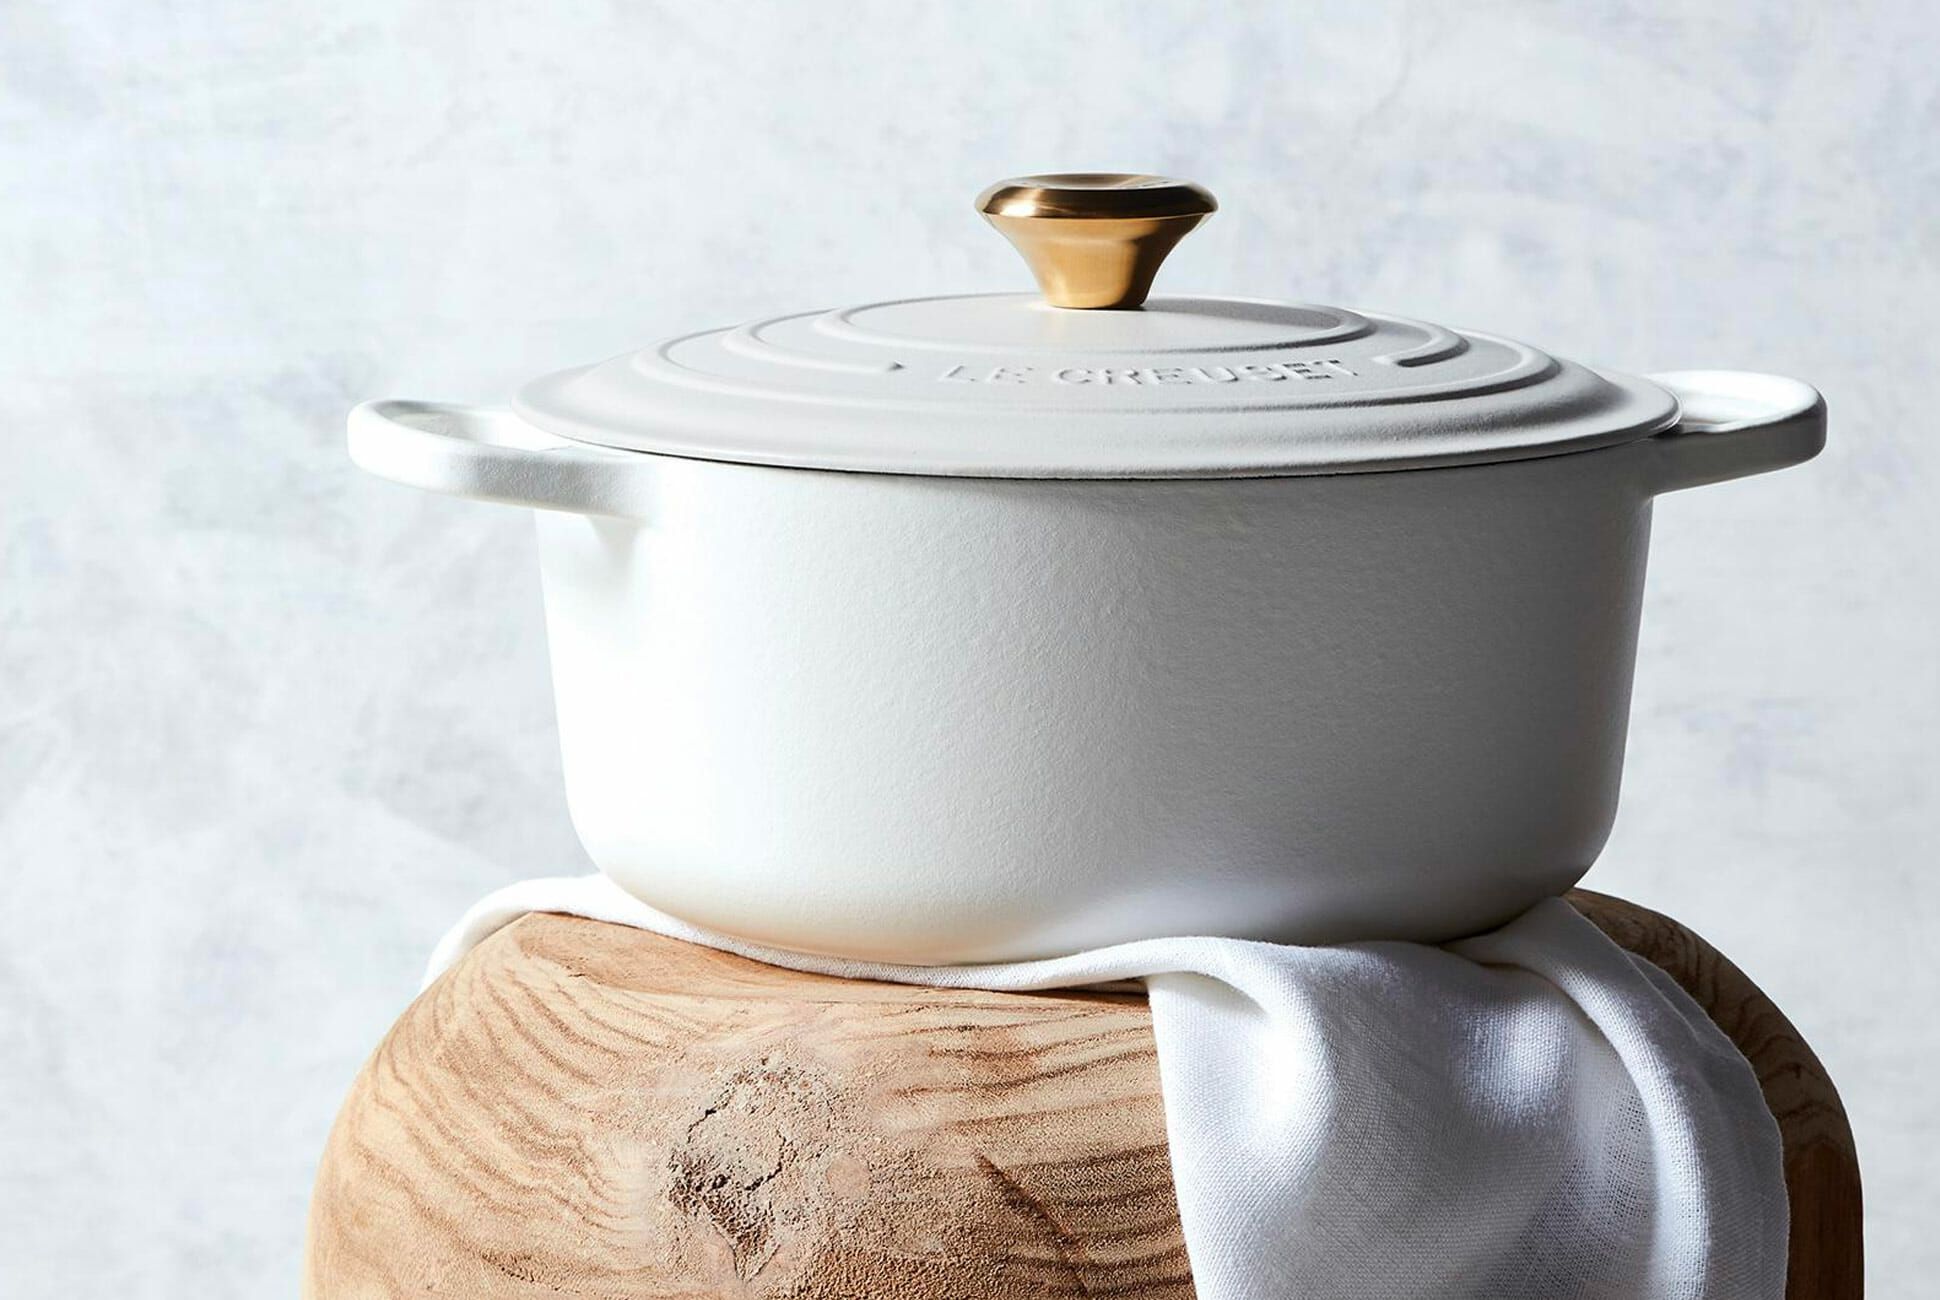 Getting Married? There's Special Le Creuset Cast-Iron Pot That